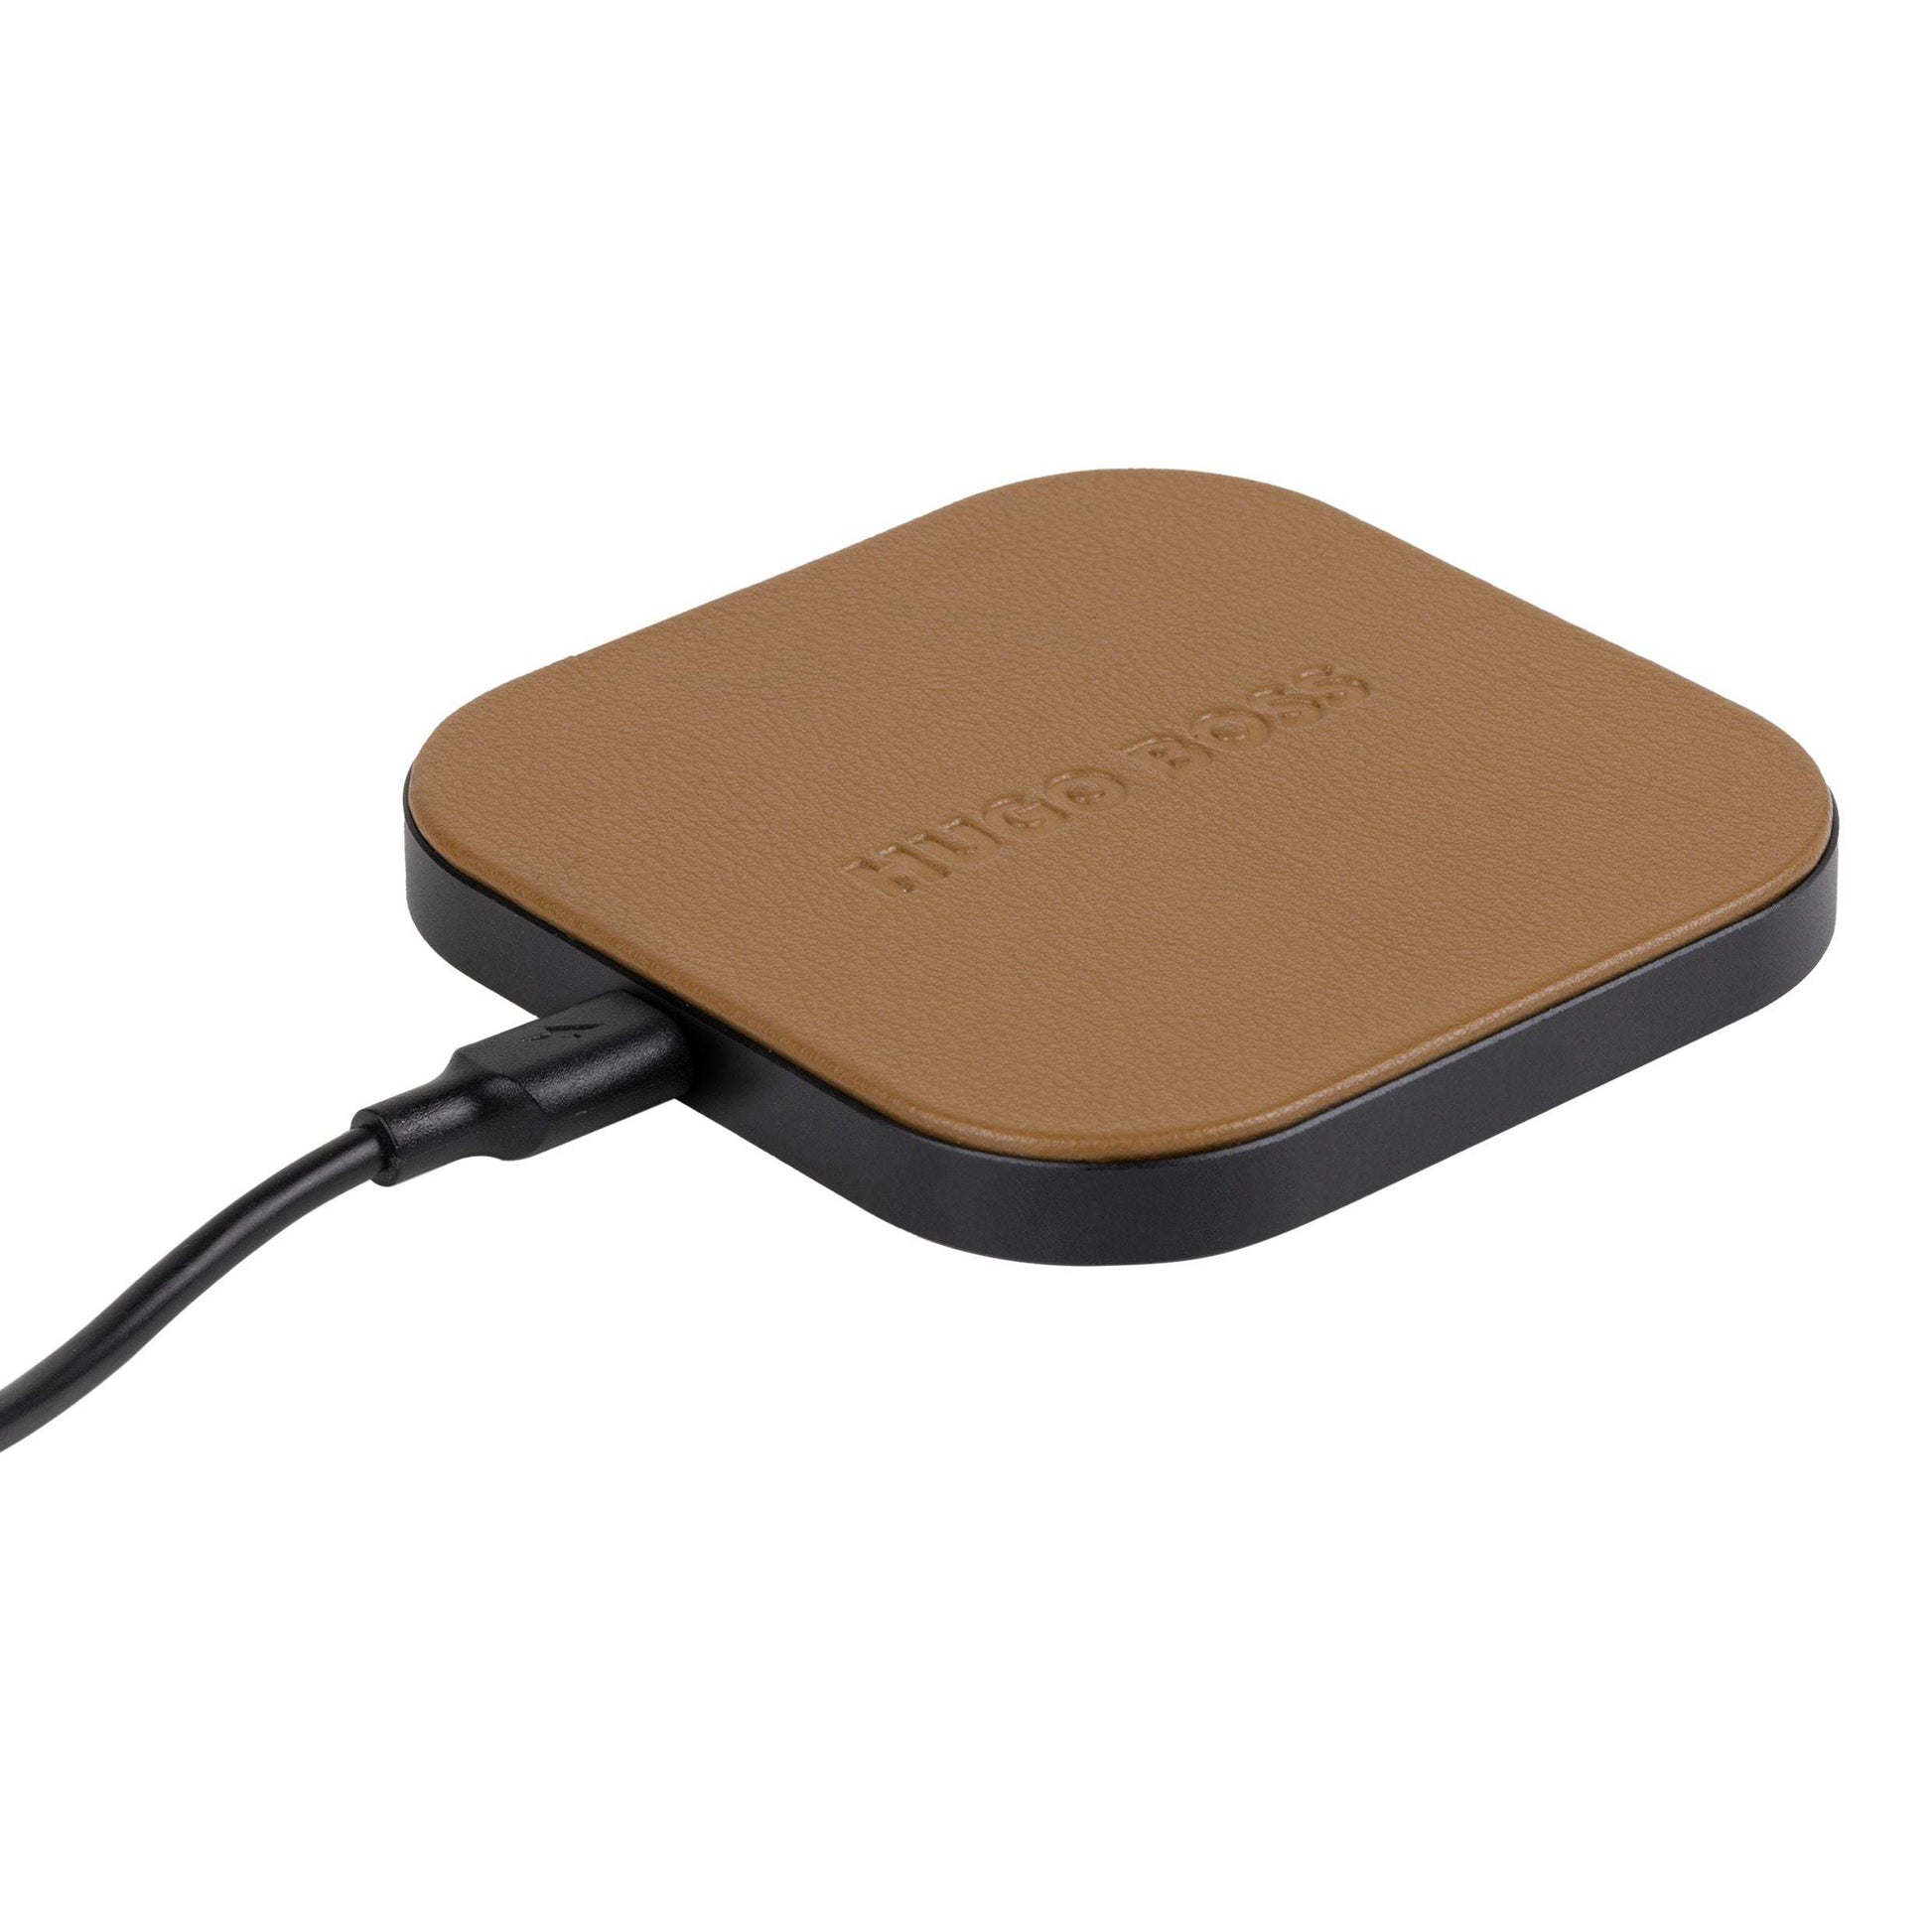 Iconic Wireless Charger by Hugo Boss - The Luxury Promotional Gifts Company Limited